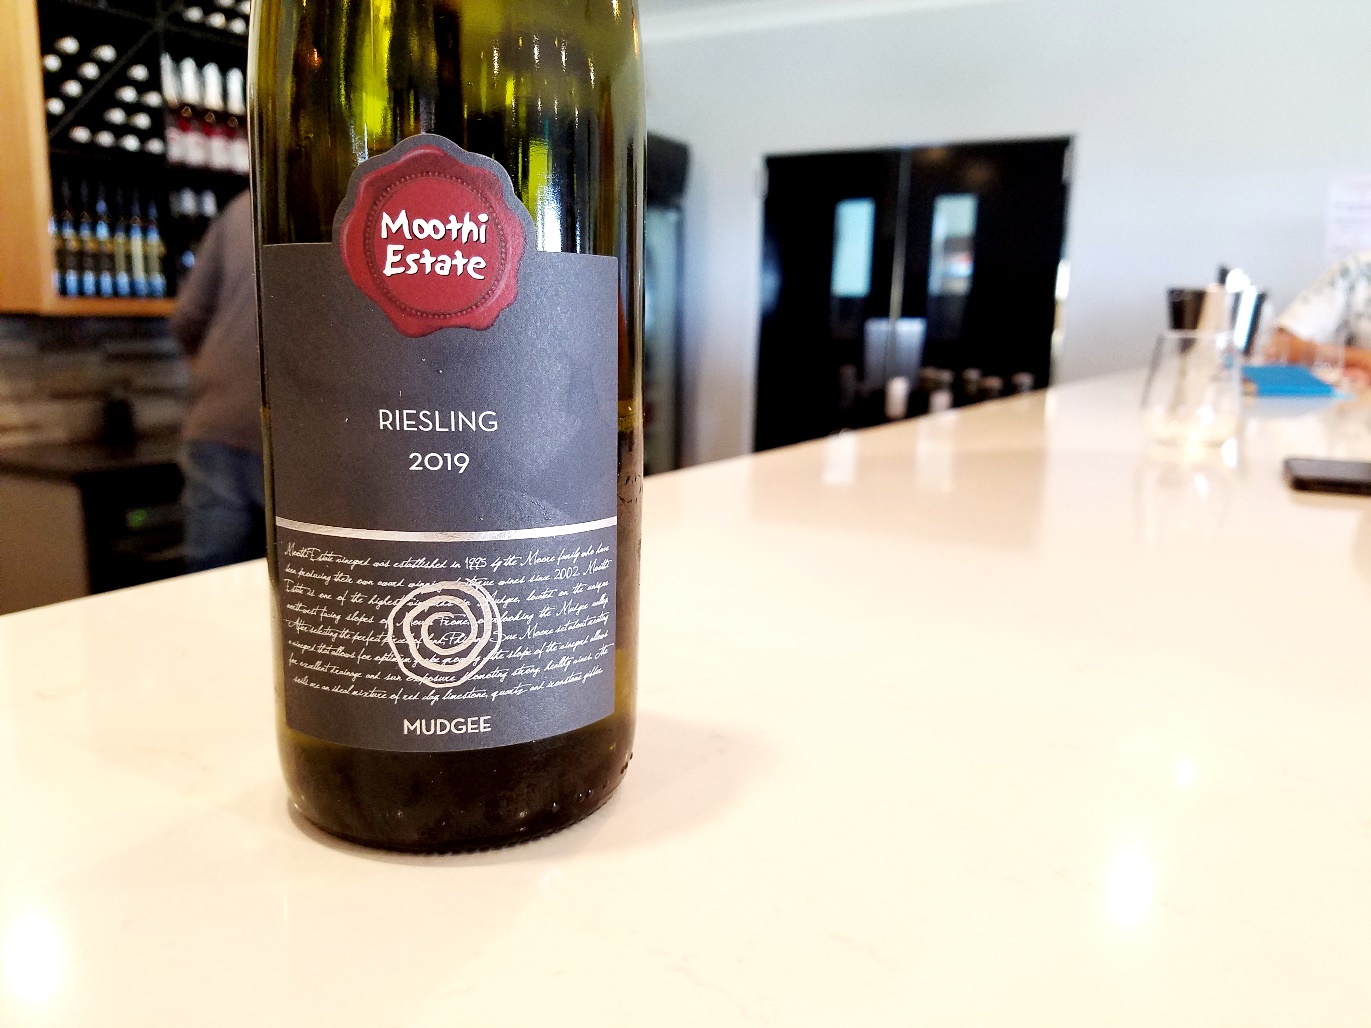 Moothi Estate, Riesling 2019, Mudgee, New South Wales, Australia, Wine Casual